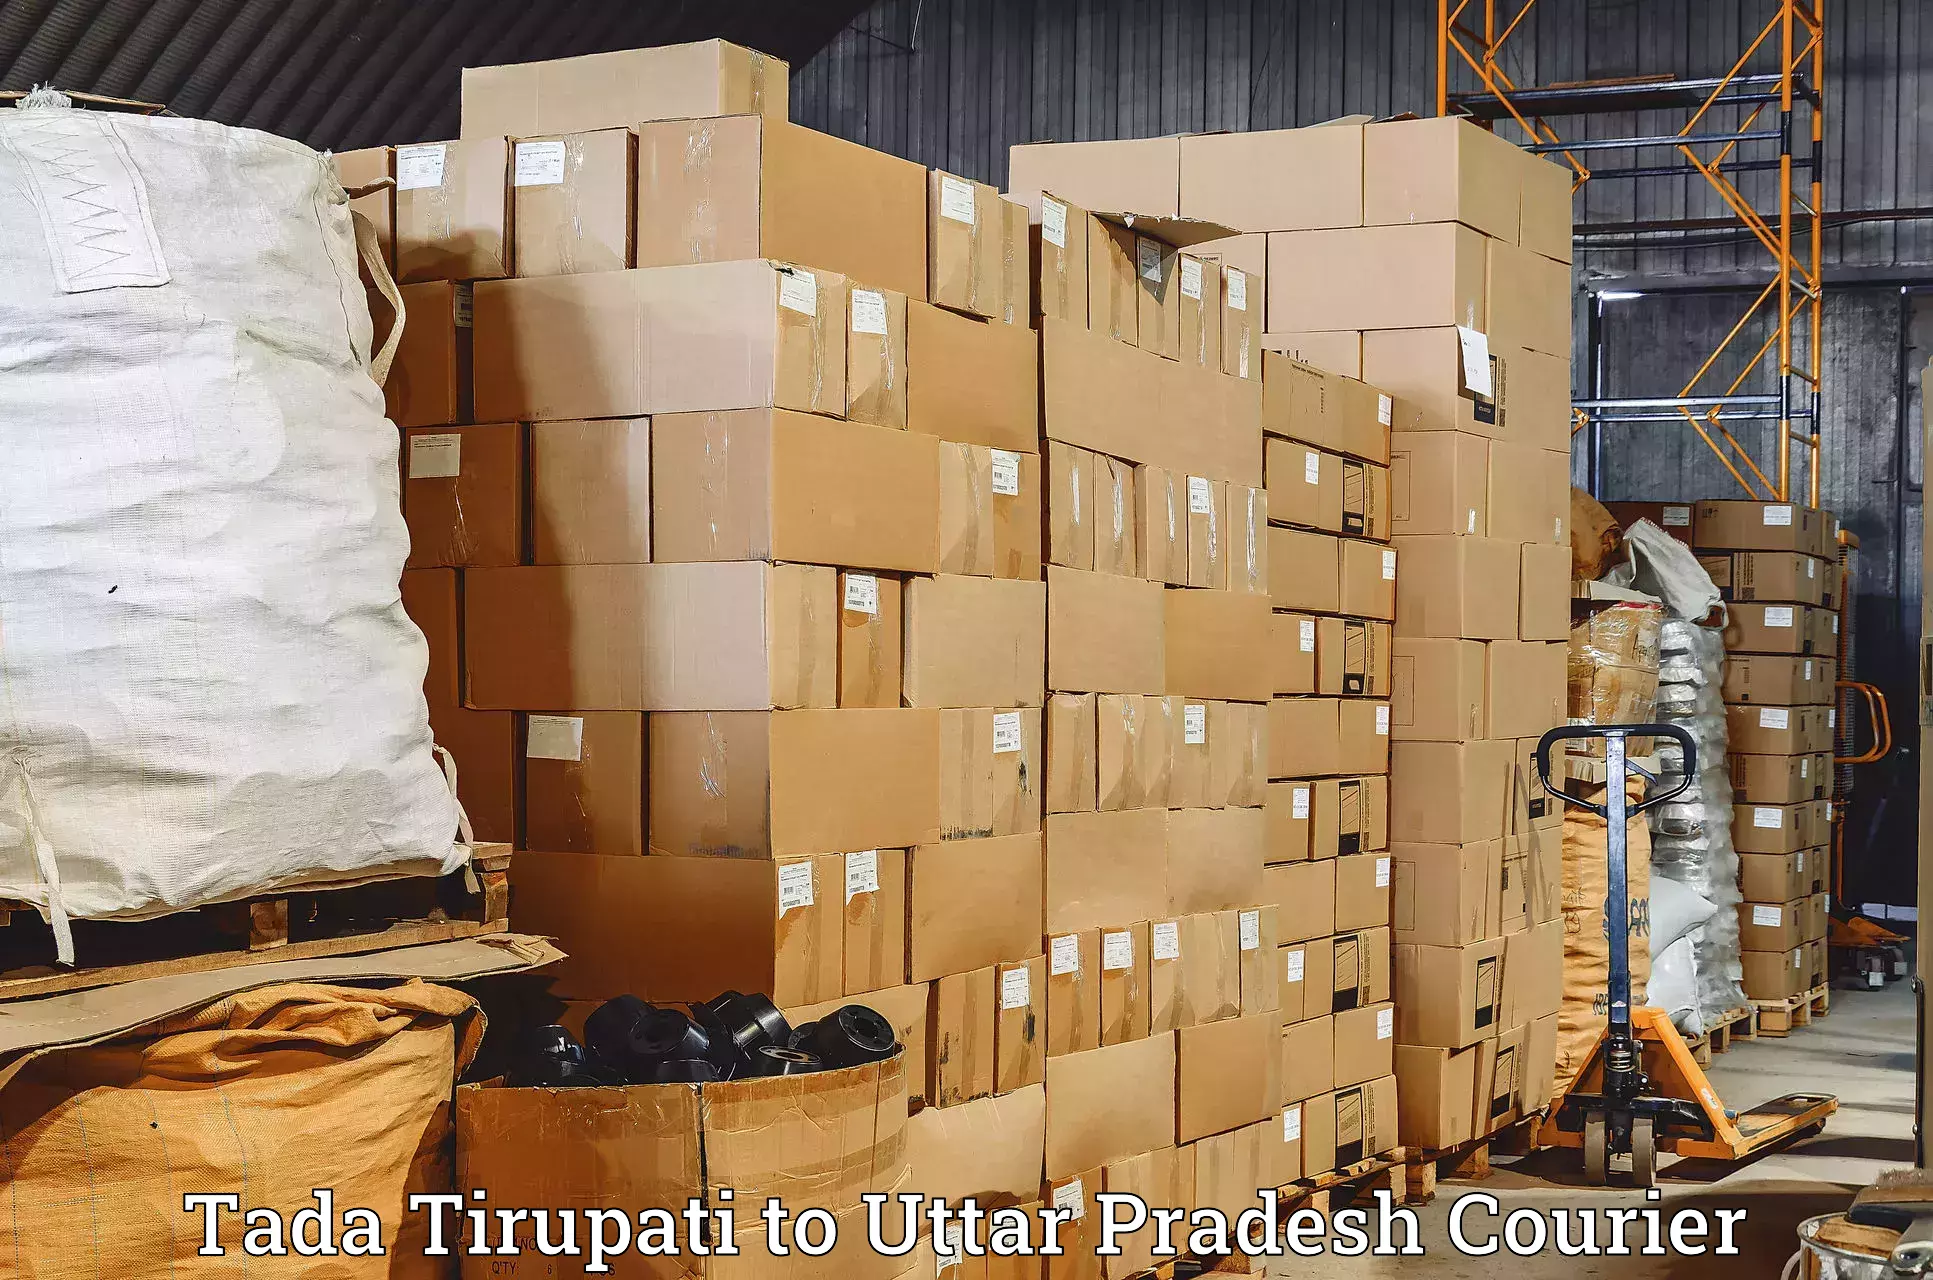 24-hour delivery options Tada Tirupati to Kanpur